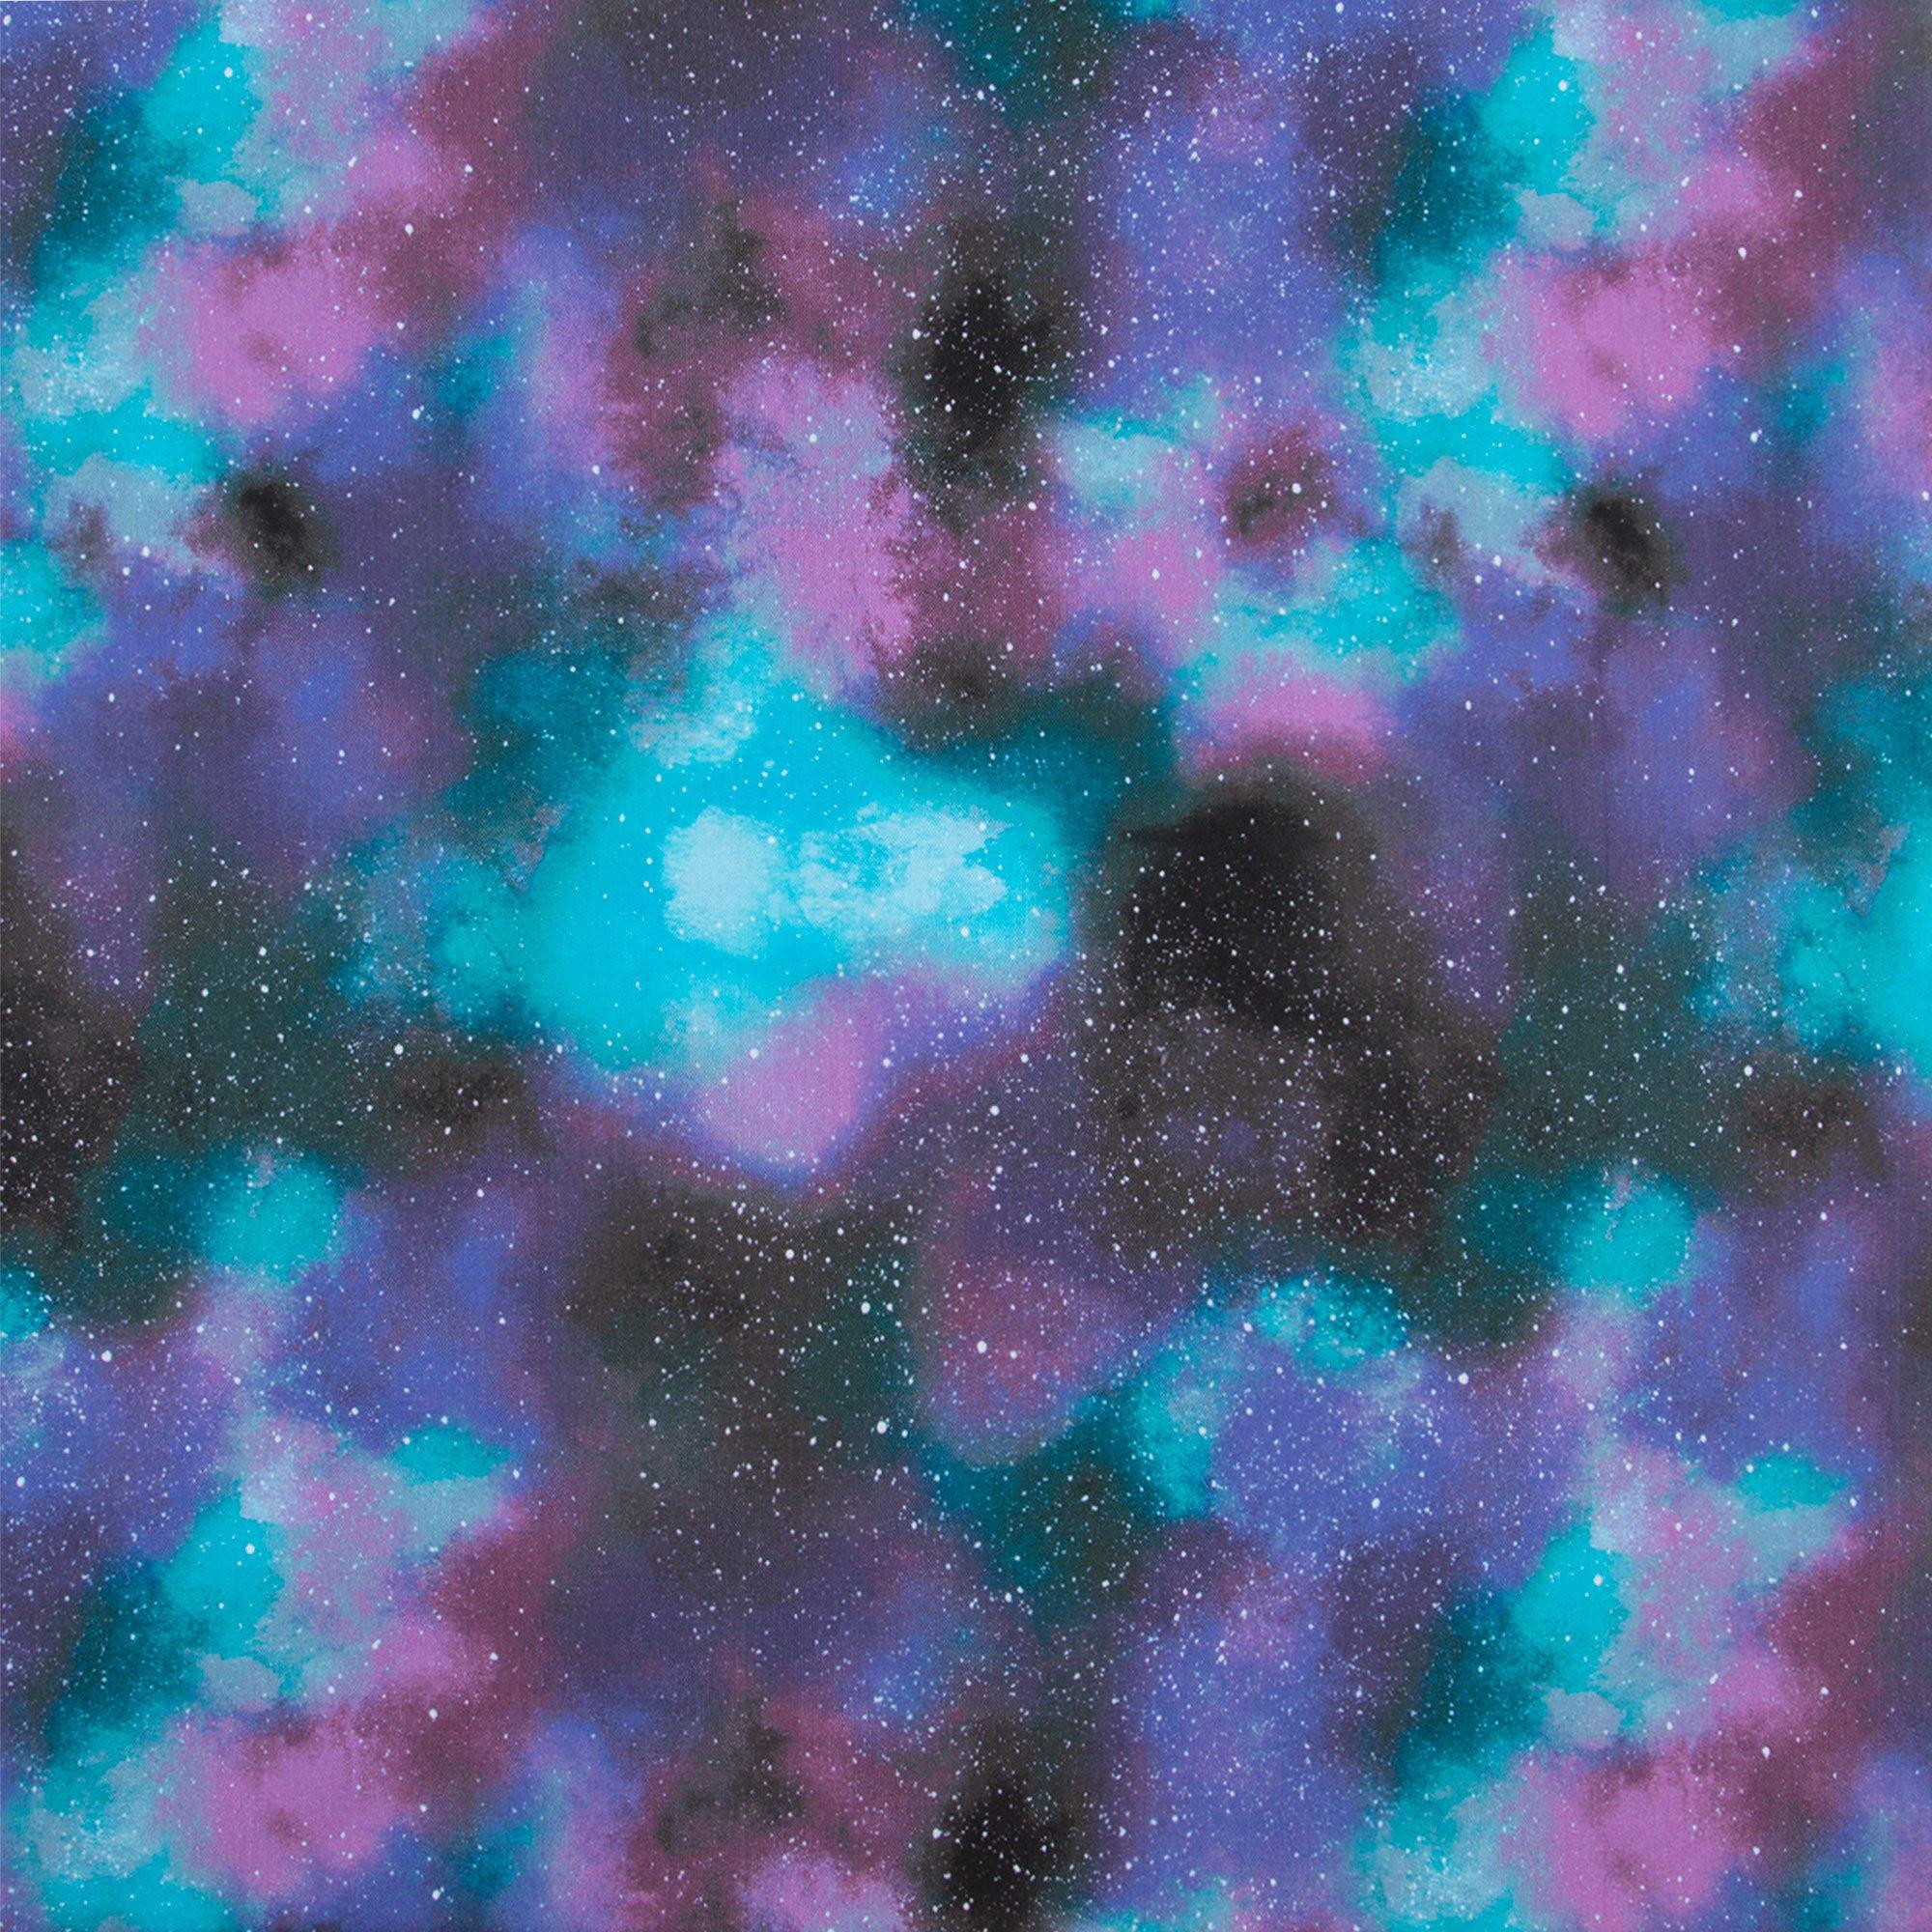 Clouds & Dots Cotton Calico Fabric, Hobby Lobby